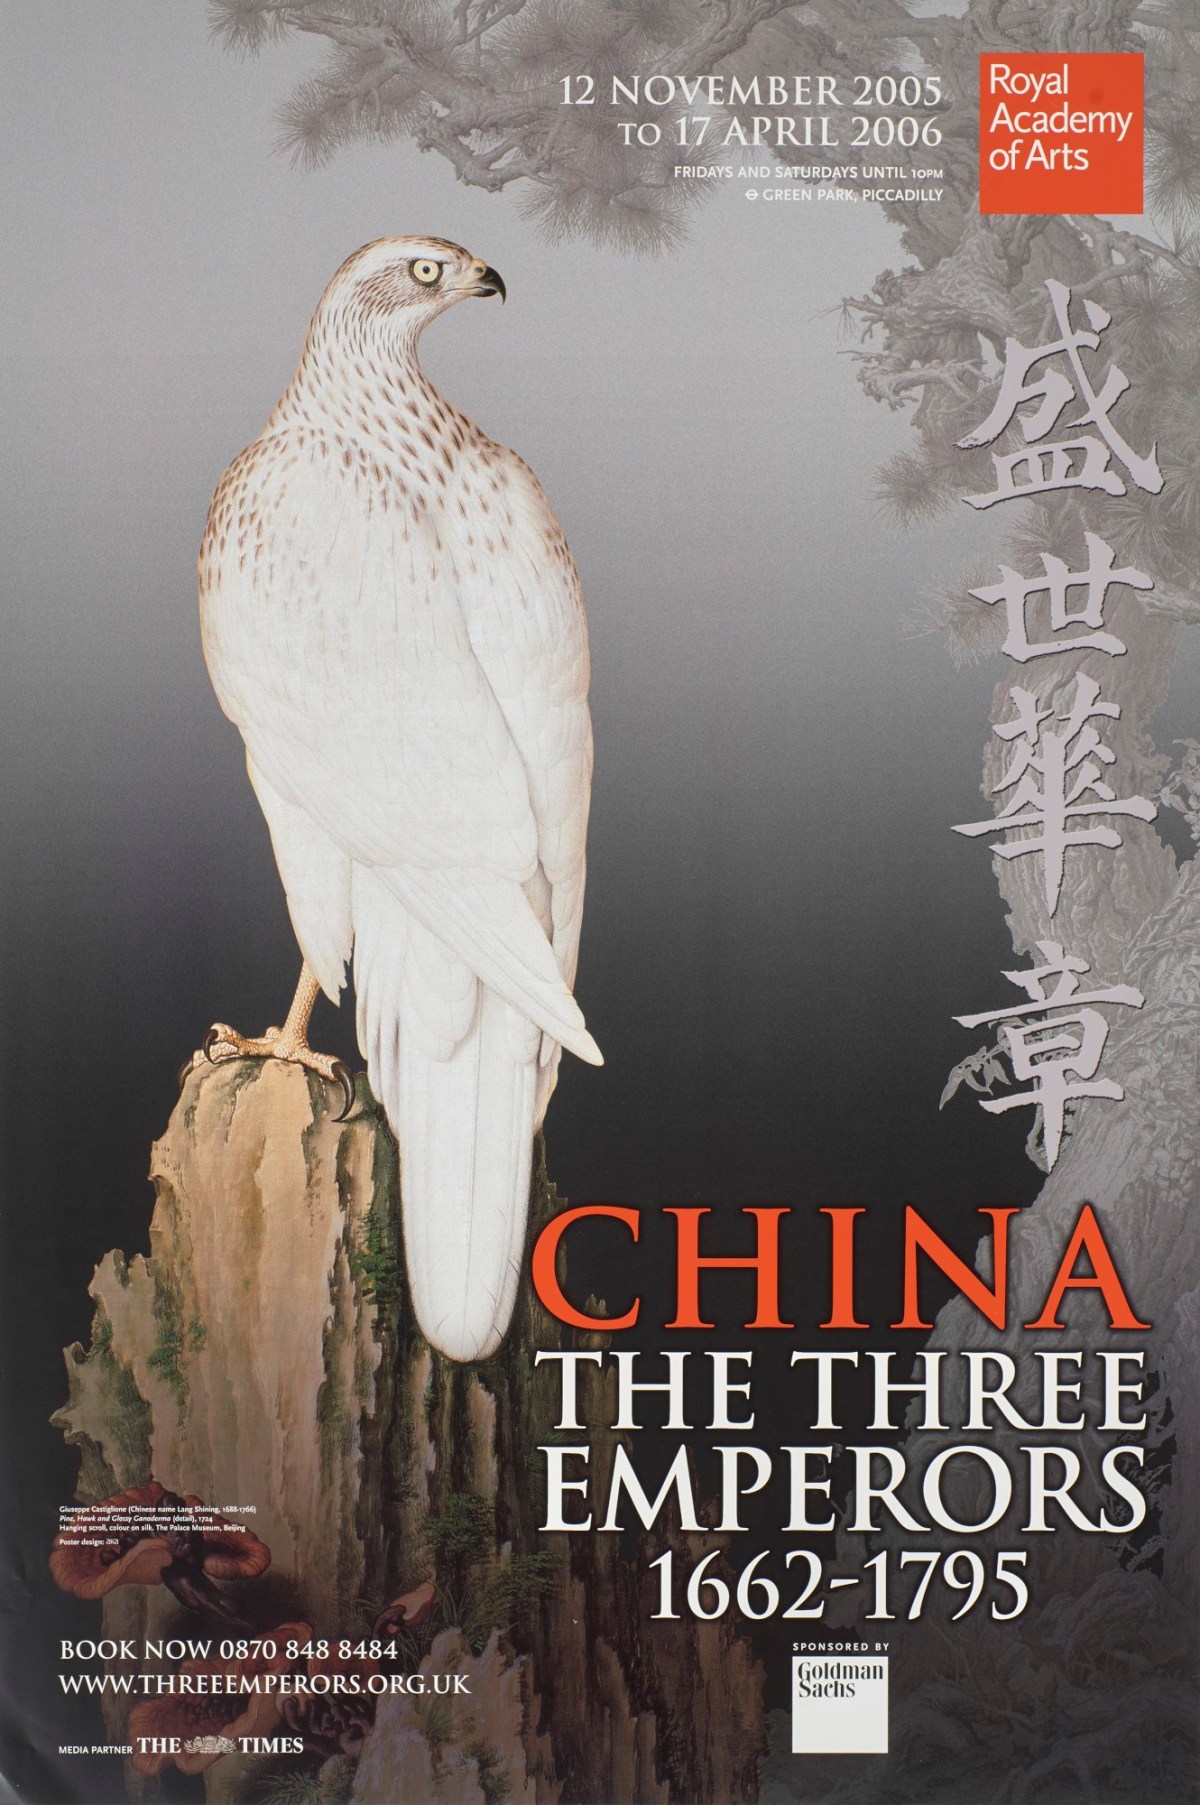 China - The Three Emperors | Archives | RA Collection | Royal